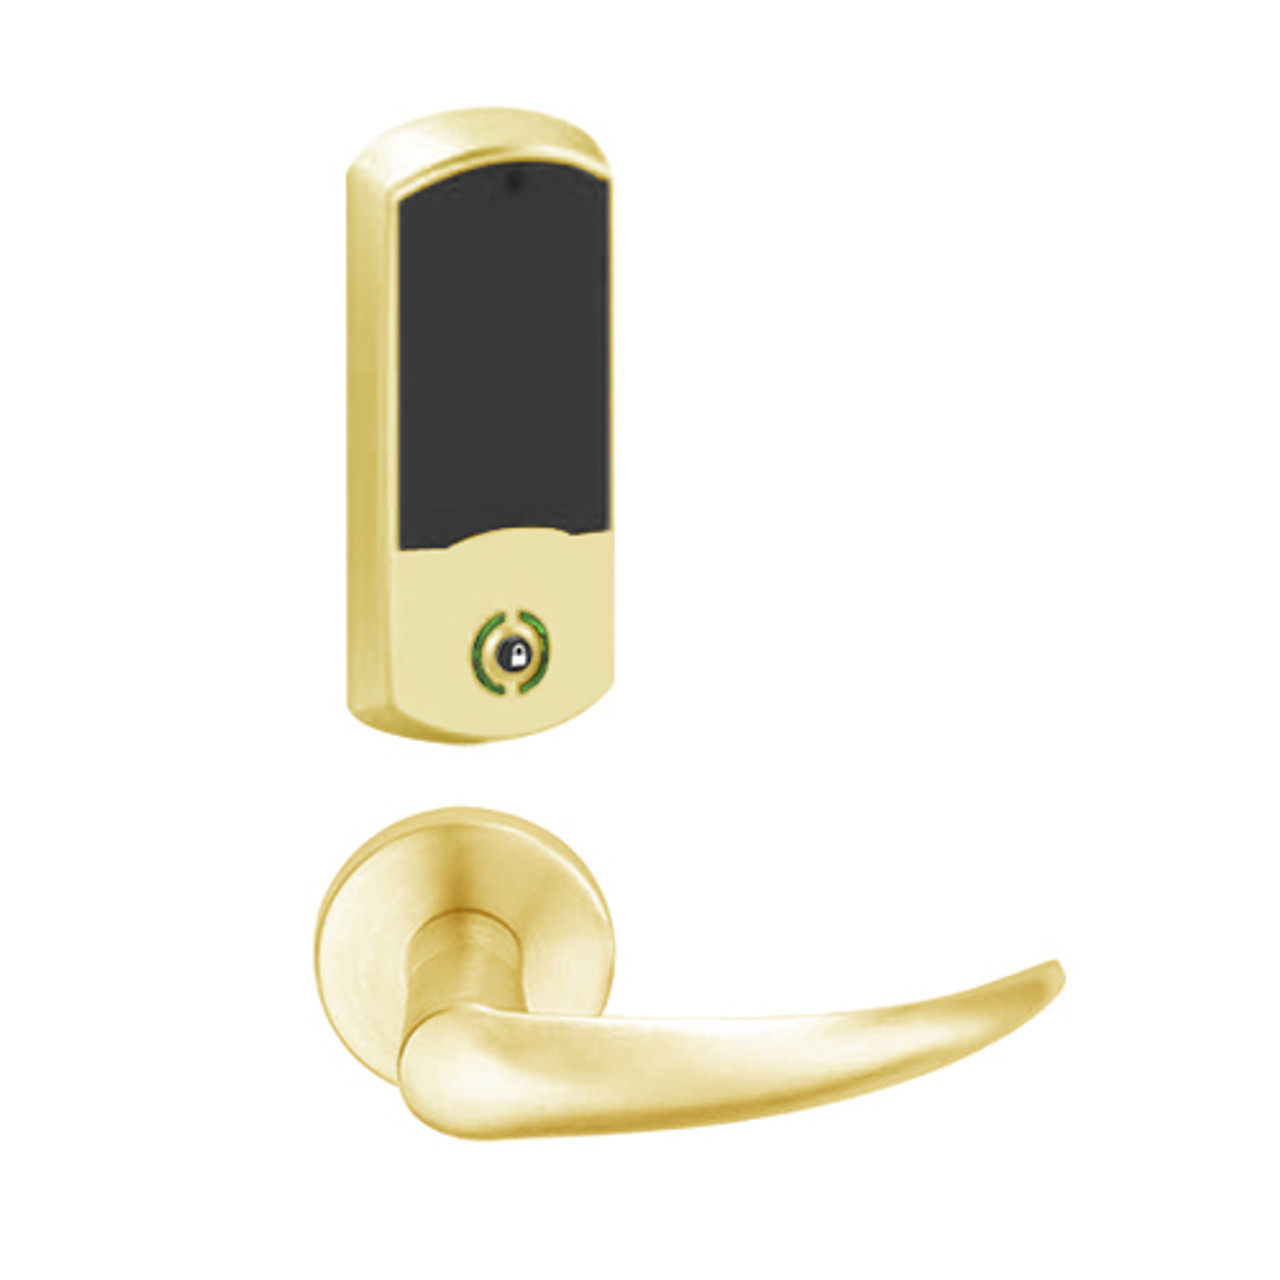 LEMB-GRW-J-OME-605-00B Schlage Privacy/Office Wireless Greenwich Mortise Lock with LED Indicator and Omega Lever Prepped for FSIC in Bright Brass